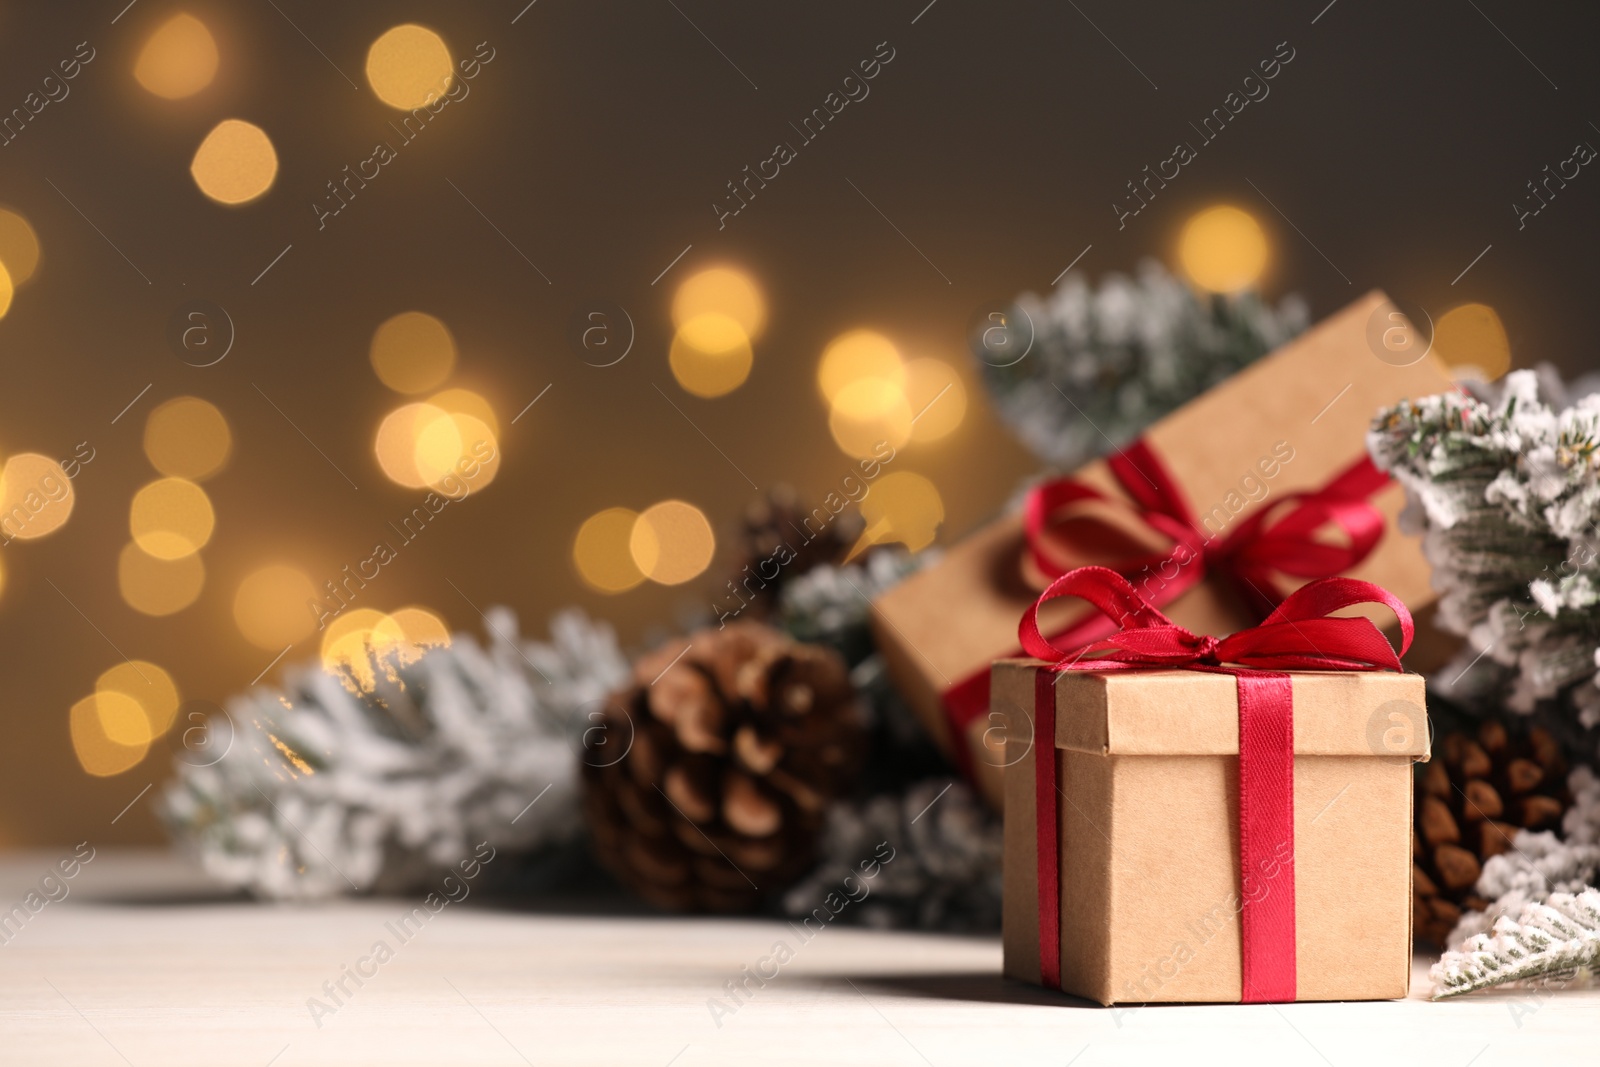 Photo of Gift boxes and Christmas decor on wooden table against blurred festive lights, space for text